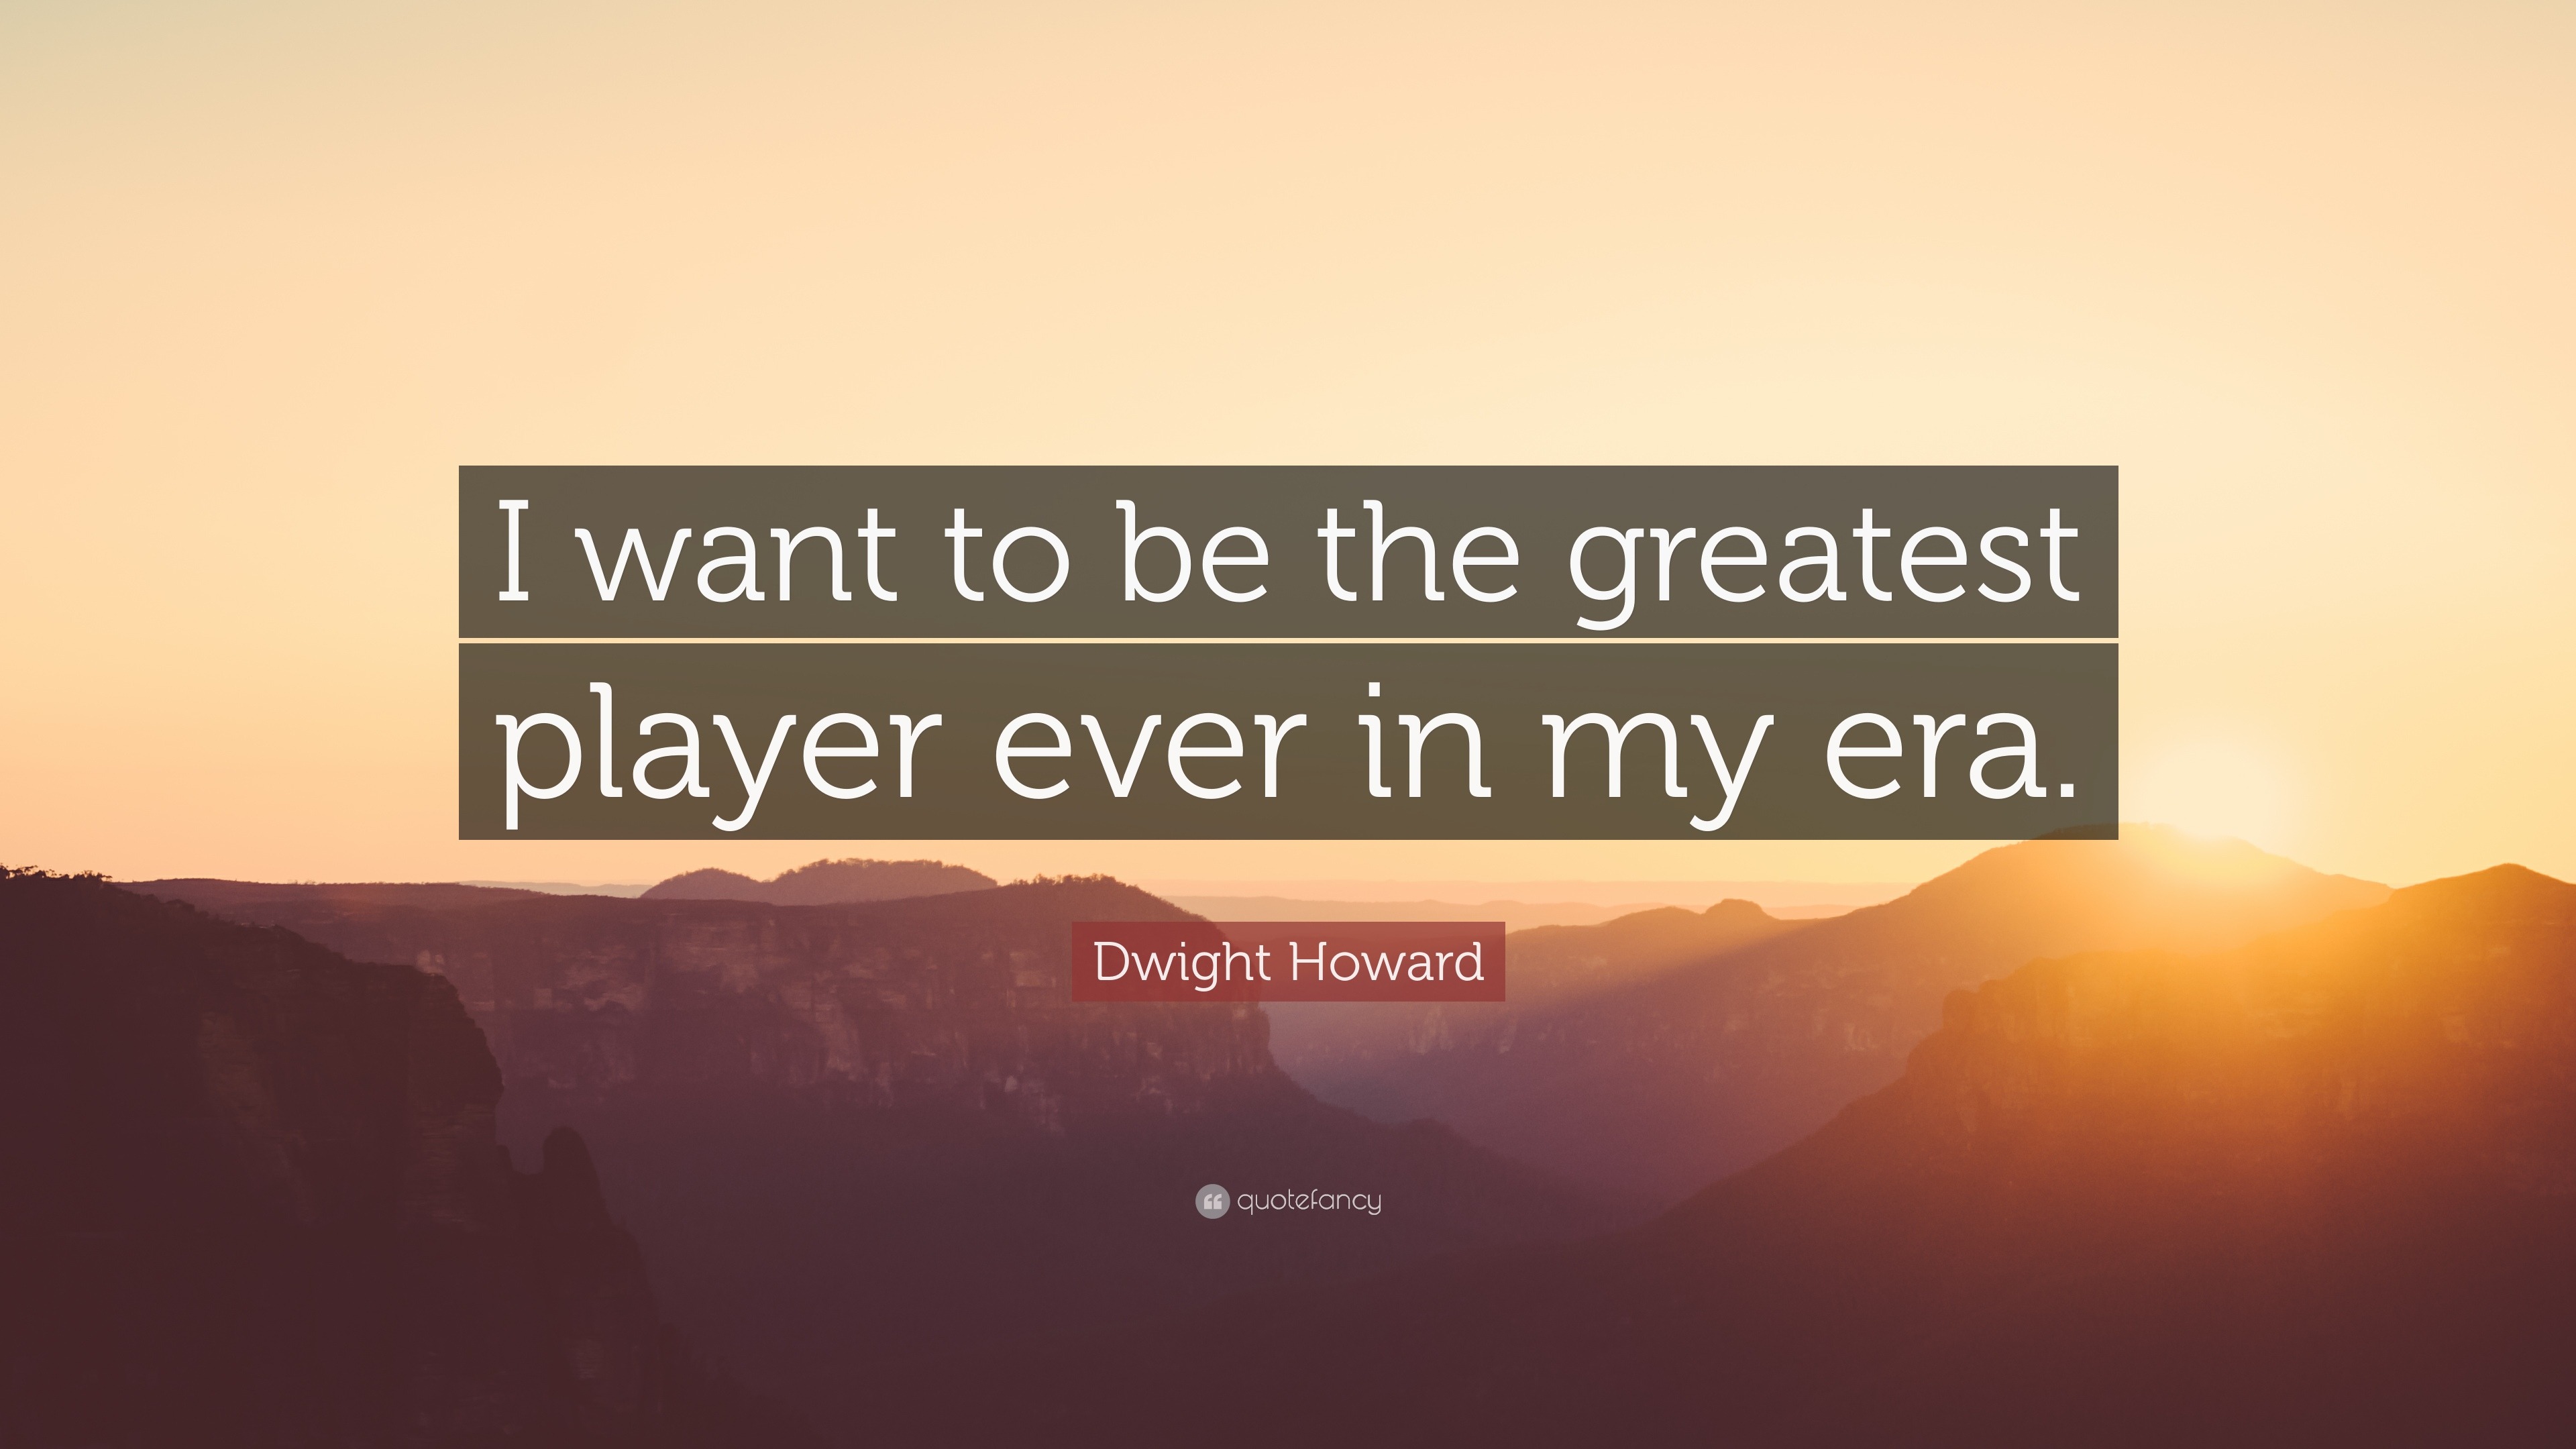 Dwight Howard quote: I want to be the greatest player ever in my